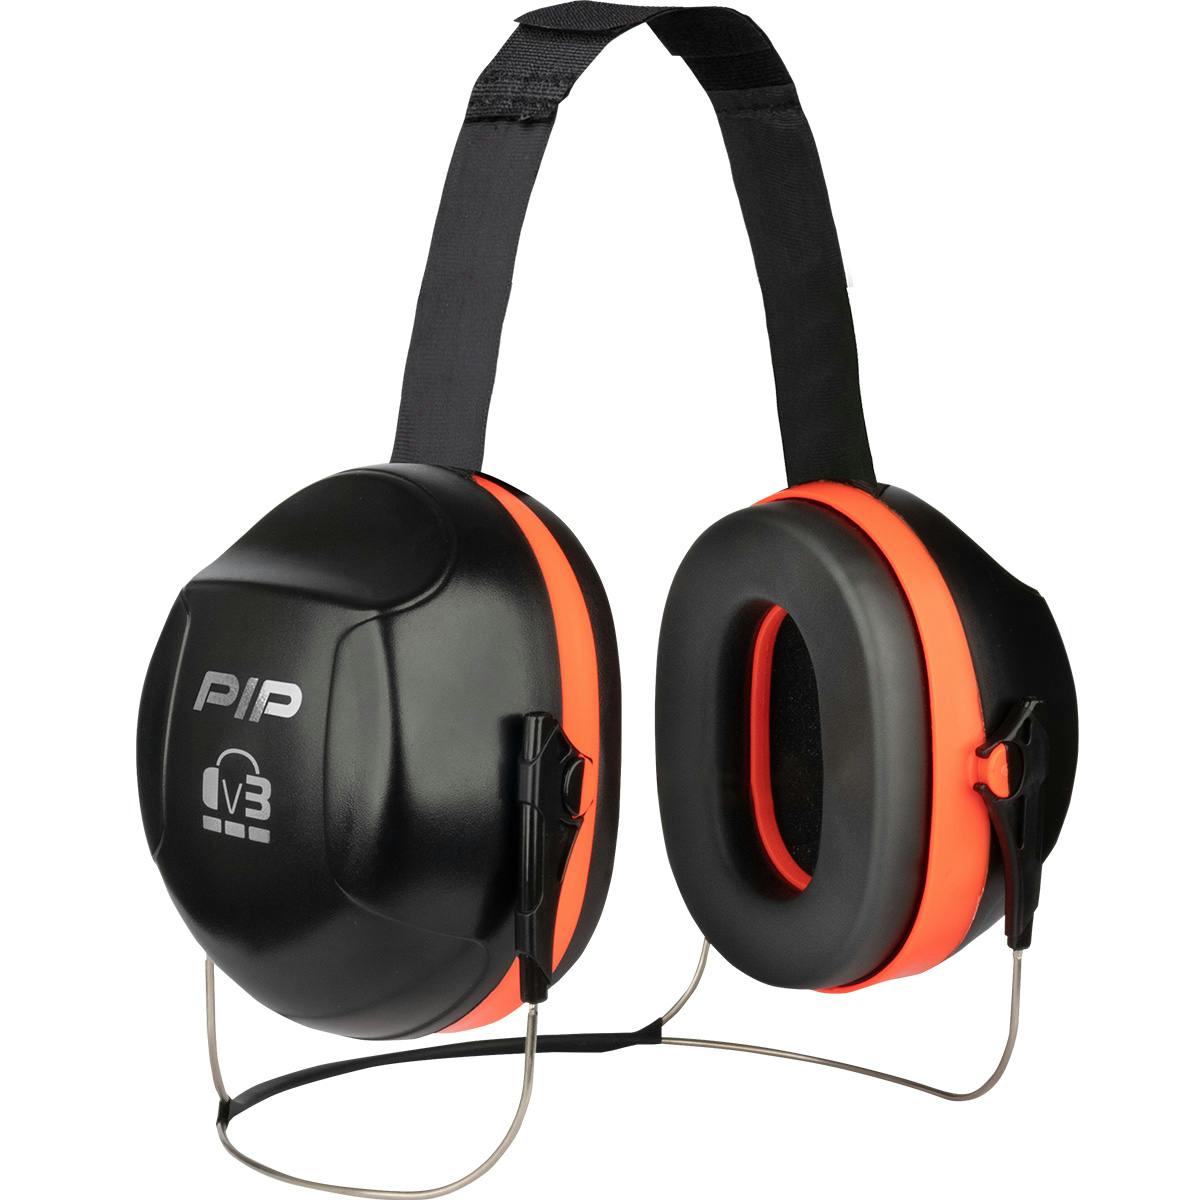 V3 Passive Ear Muff with Neckband - NRR 27, Neon Red (263-V3NB) - OS_0